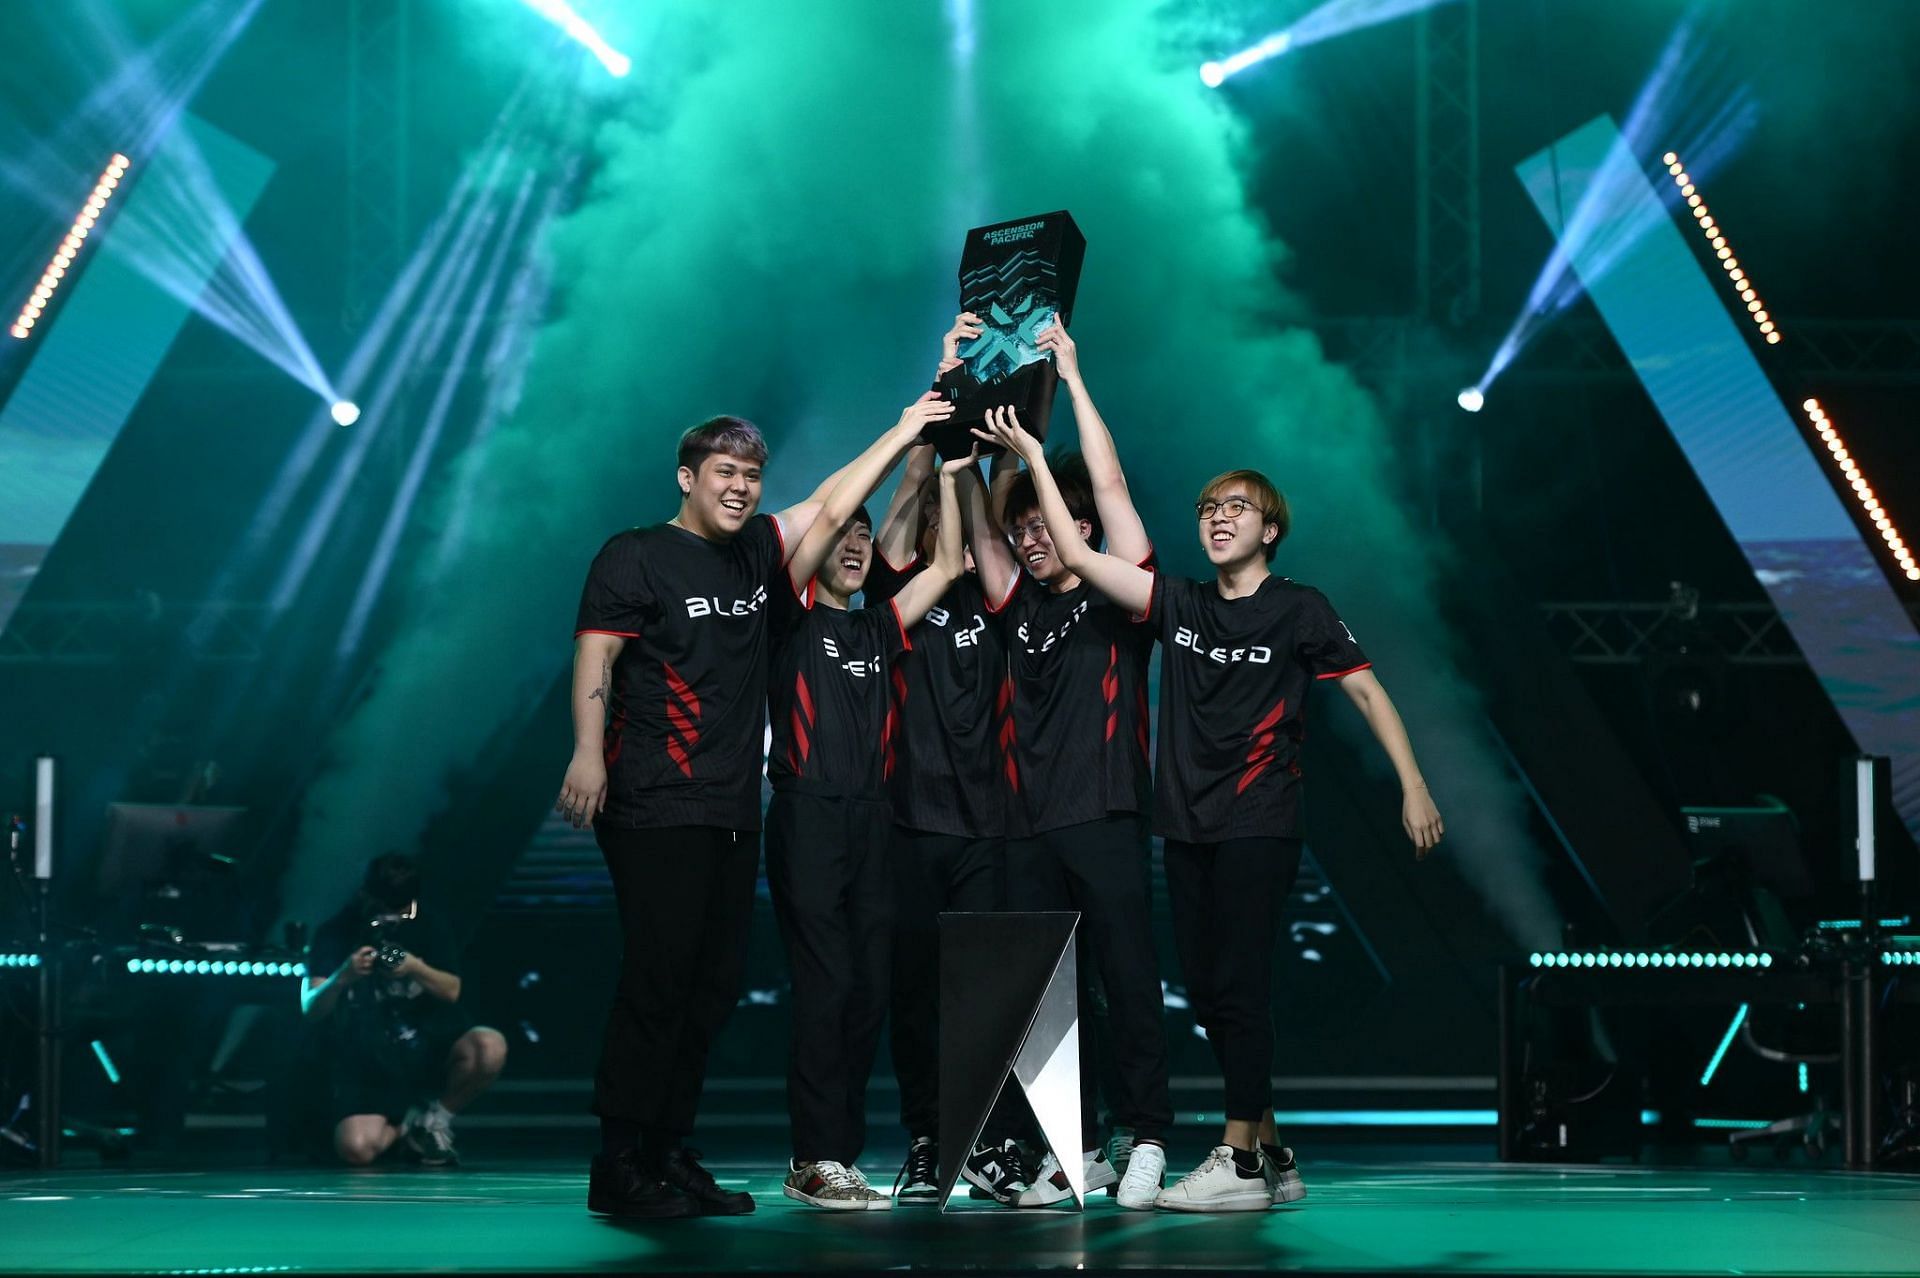 BLEED wins VCT Ascension 2023 (Image via Riot Games)